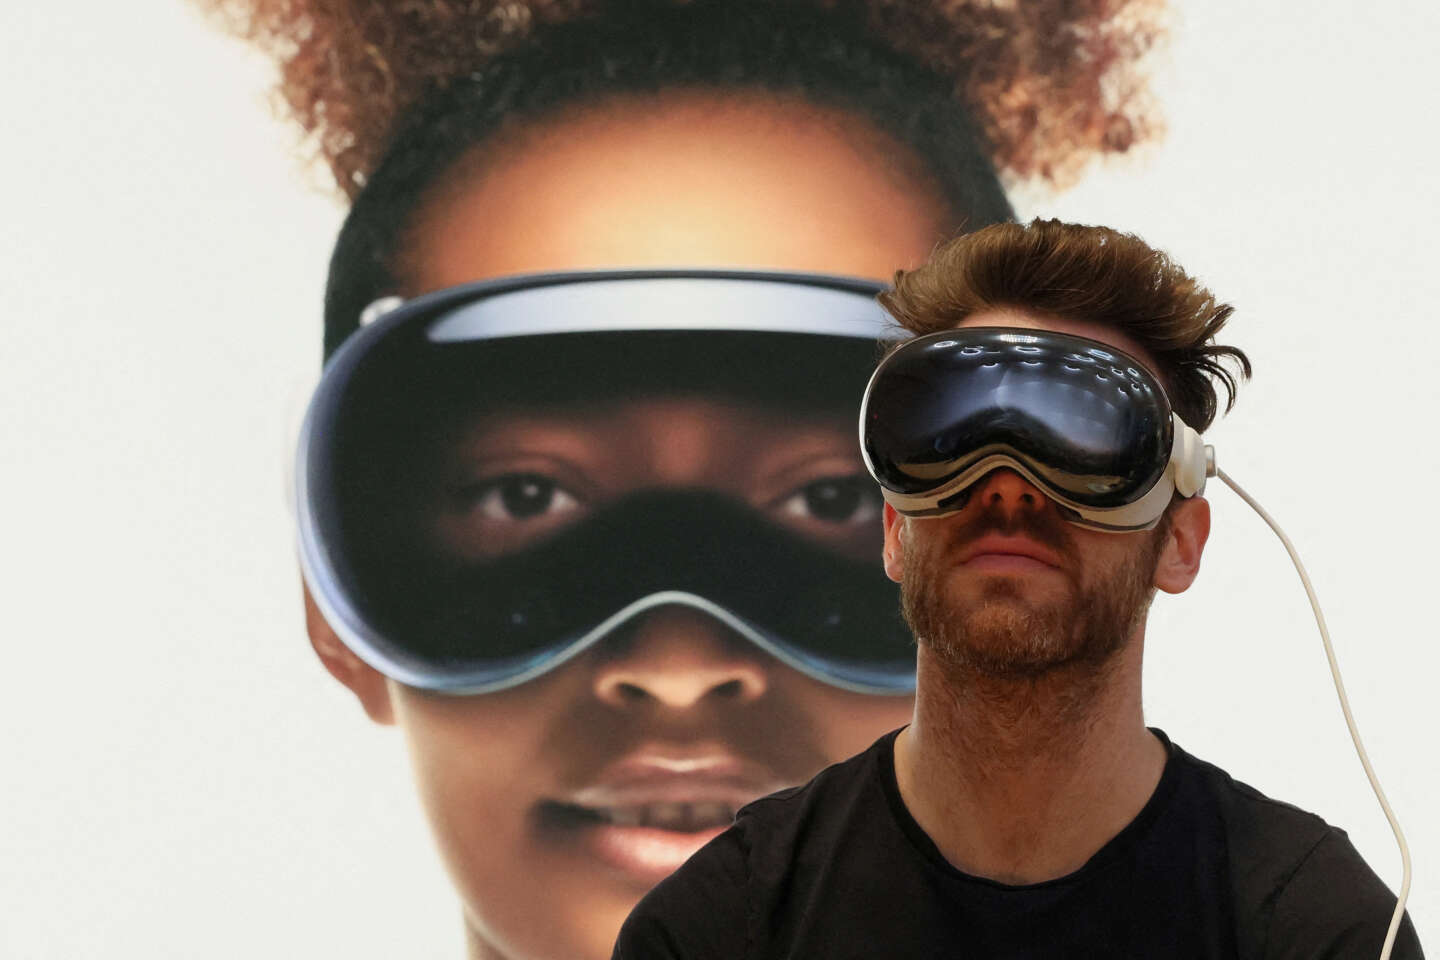 On the other hand, Apple is moving towards virtual reality